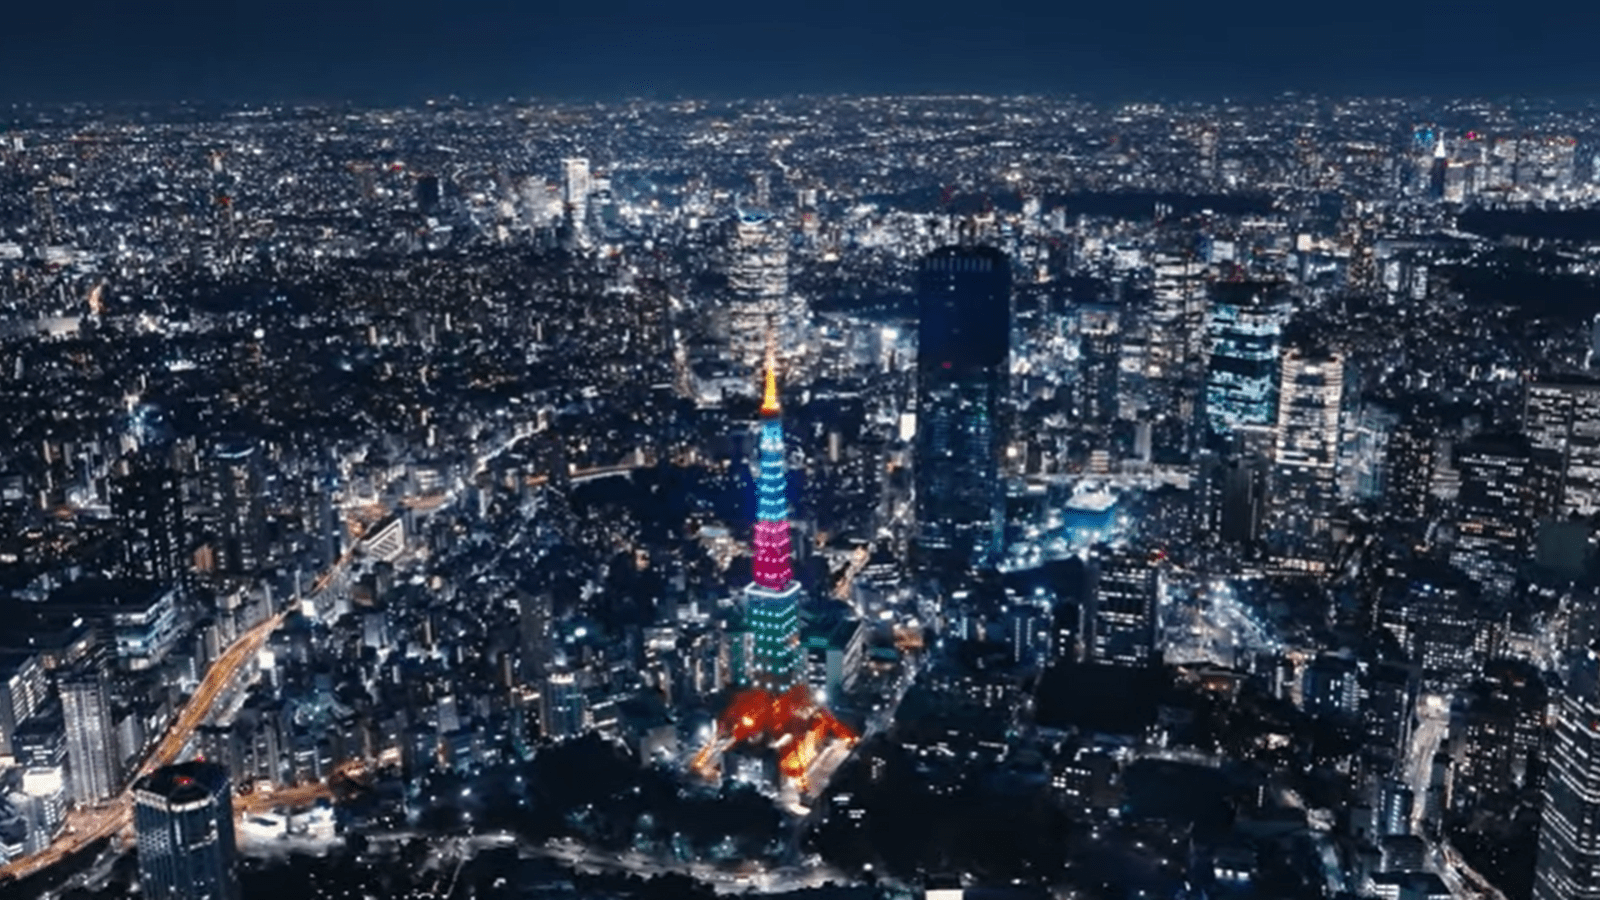 Aerial nighttime view of Tokyo, including the Tokyo Tower lit up in pink, blue and green colors for Rare Disease Day.